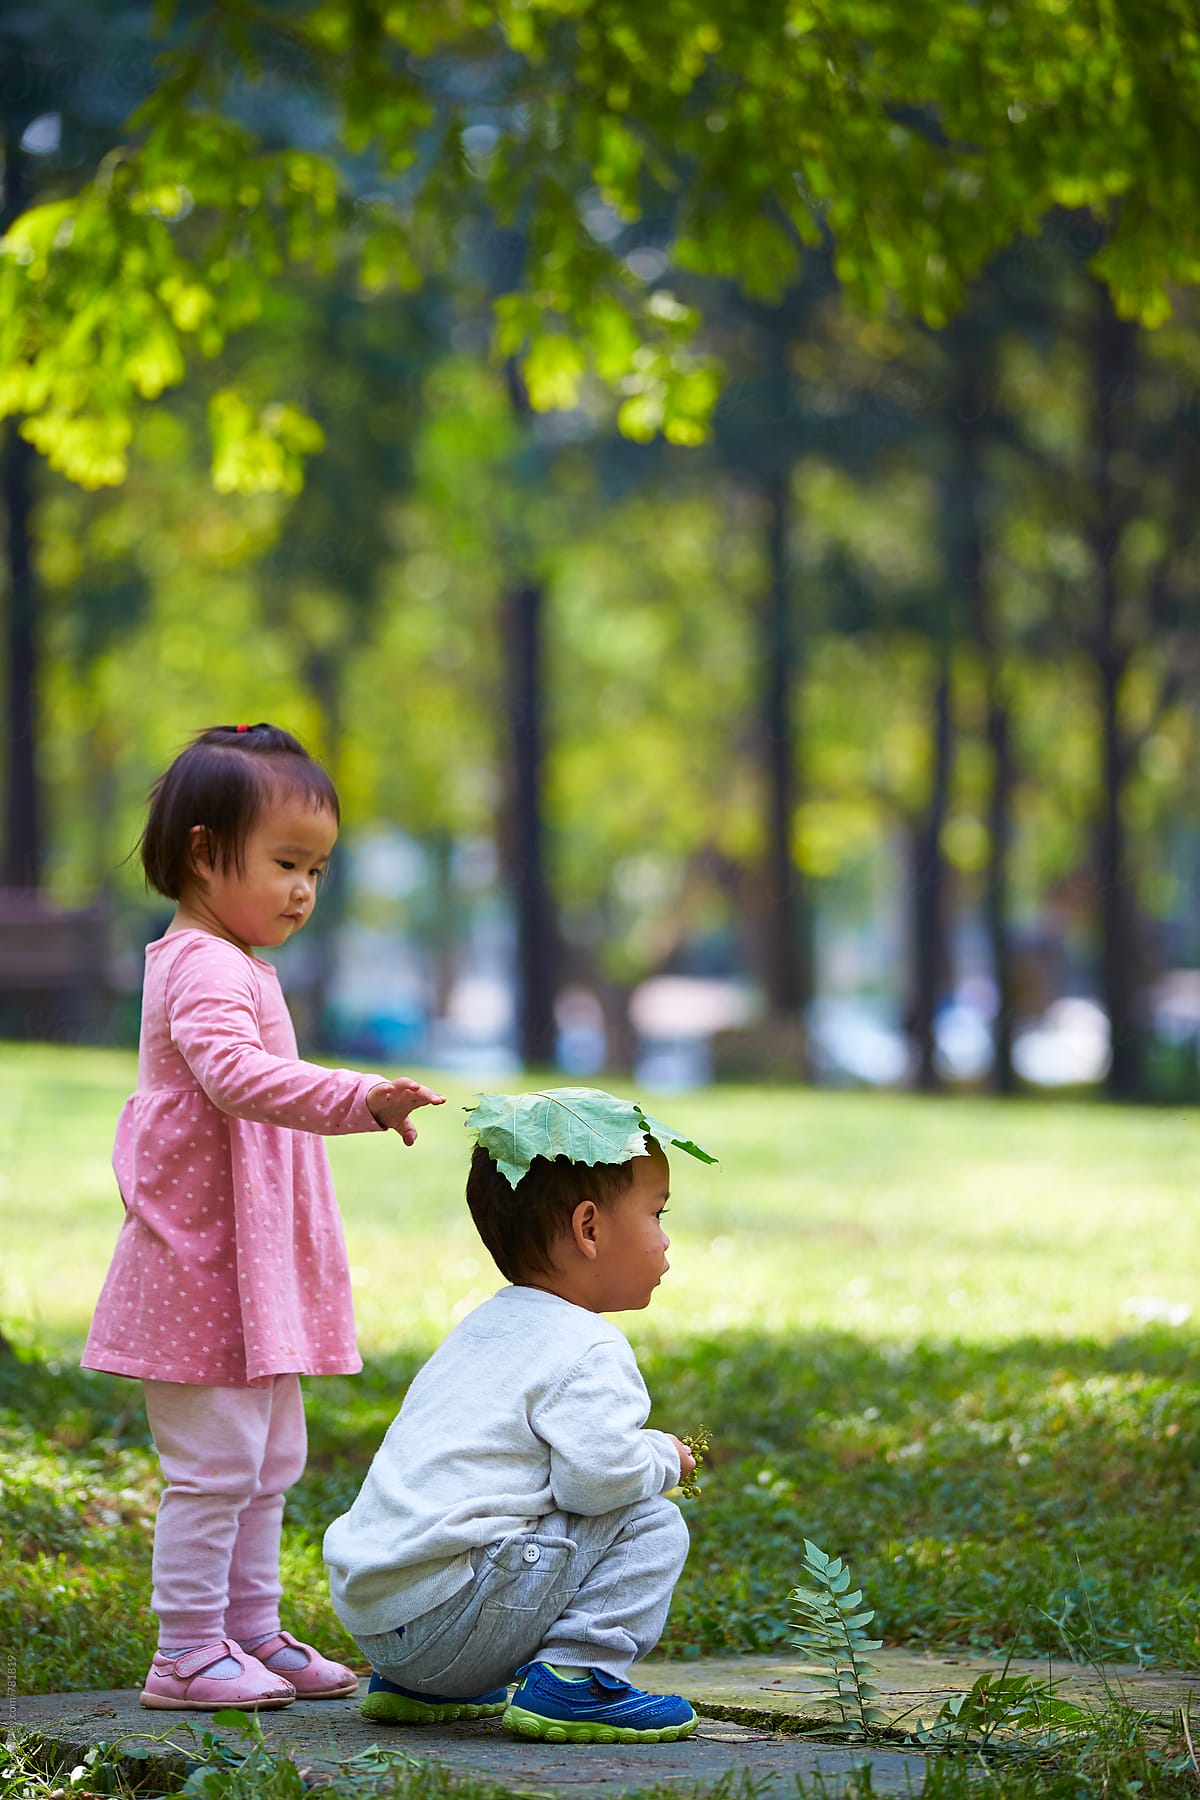 Happy Asian Kids Playing Outdoor In The Park by Stocksy Contributor Bo  Bo - Stocksy